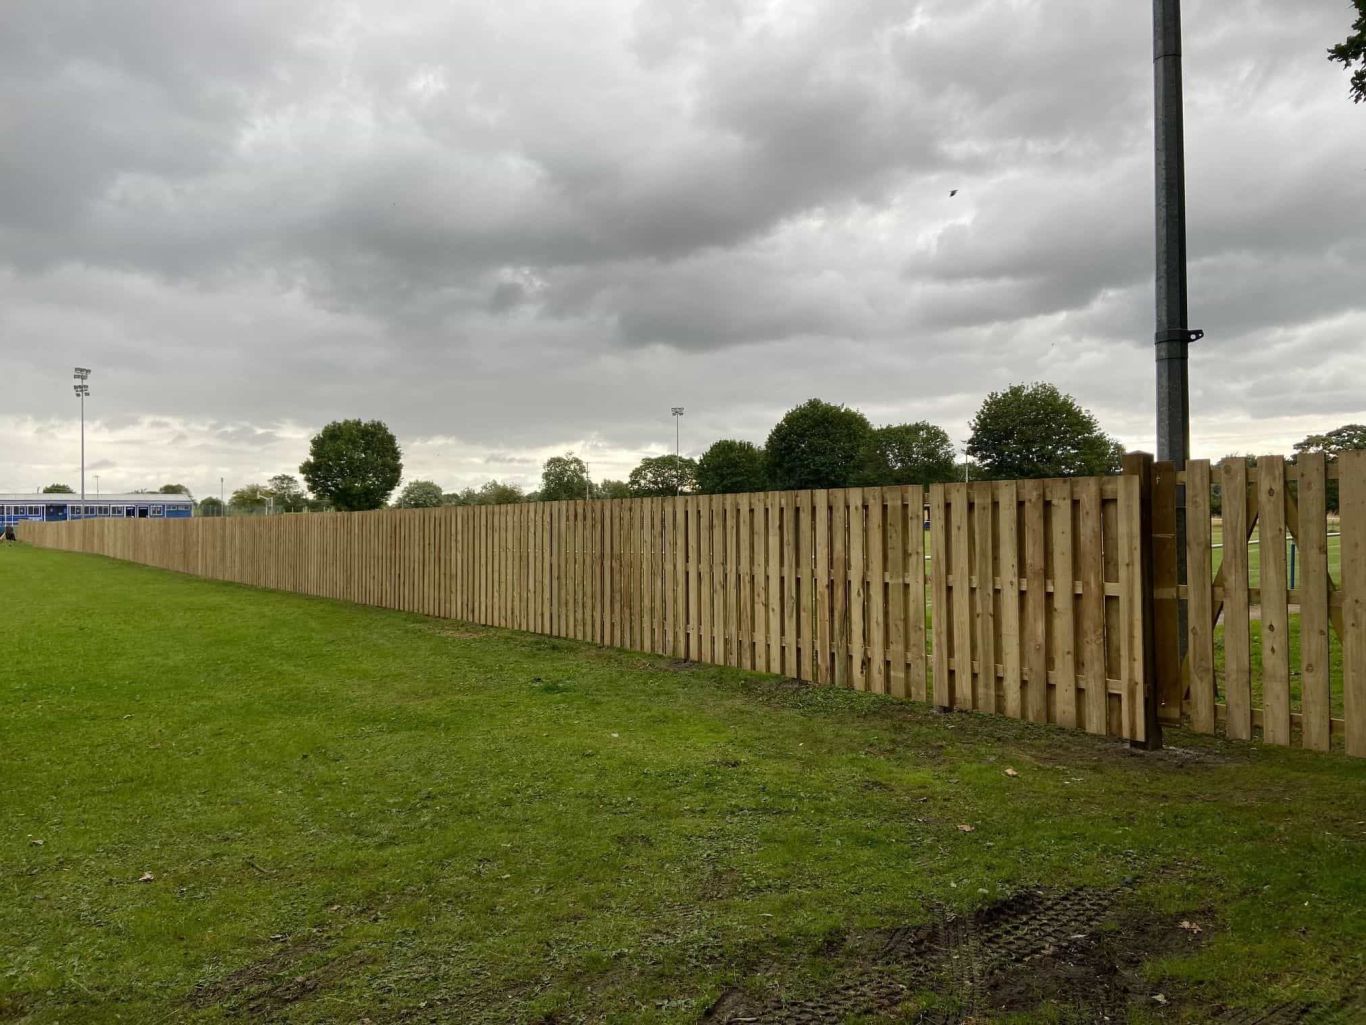 Fencing at amesbury football club completed looking down the football pitch.